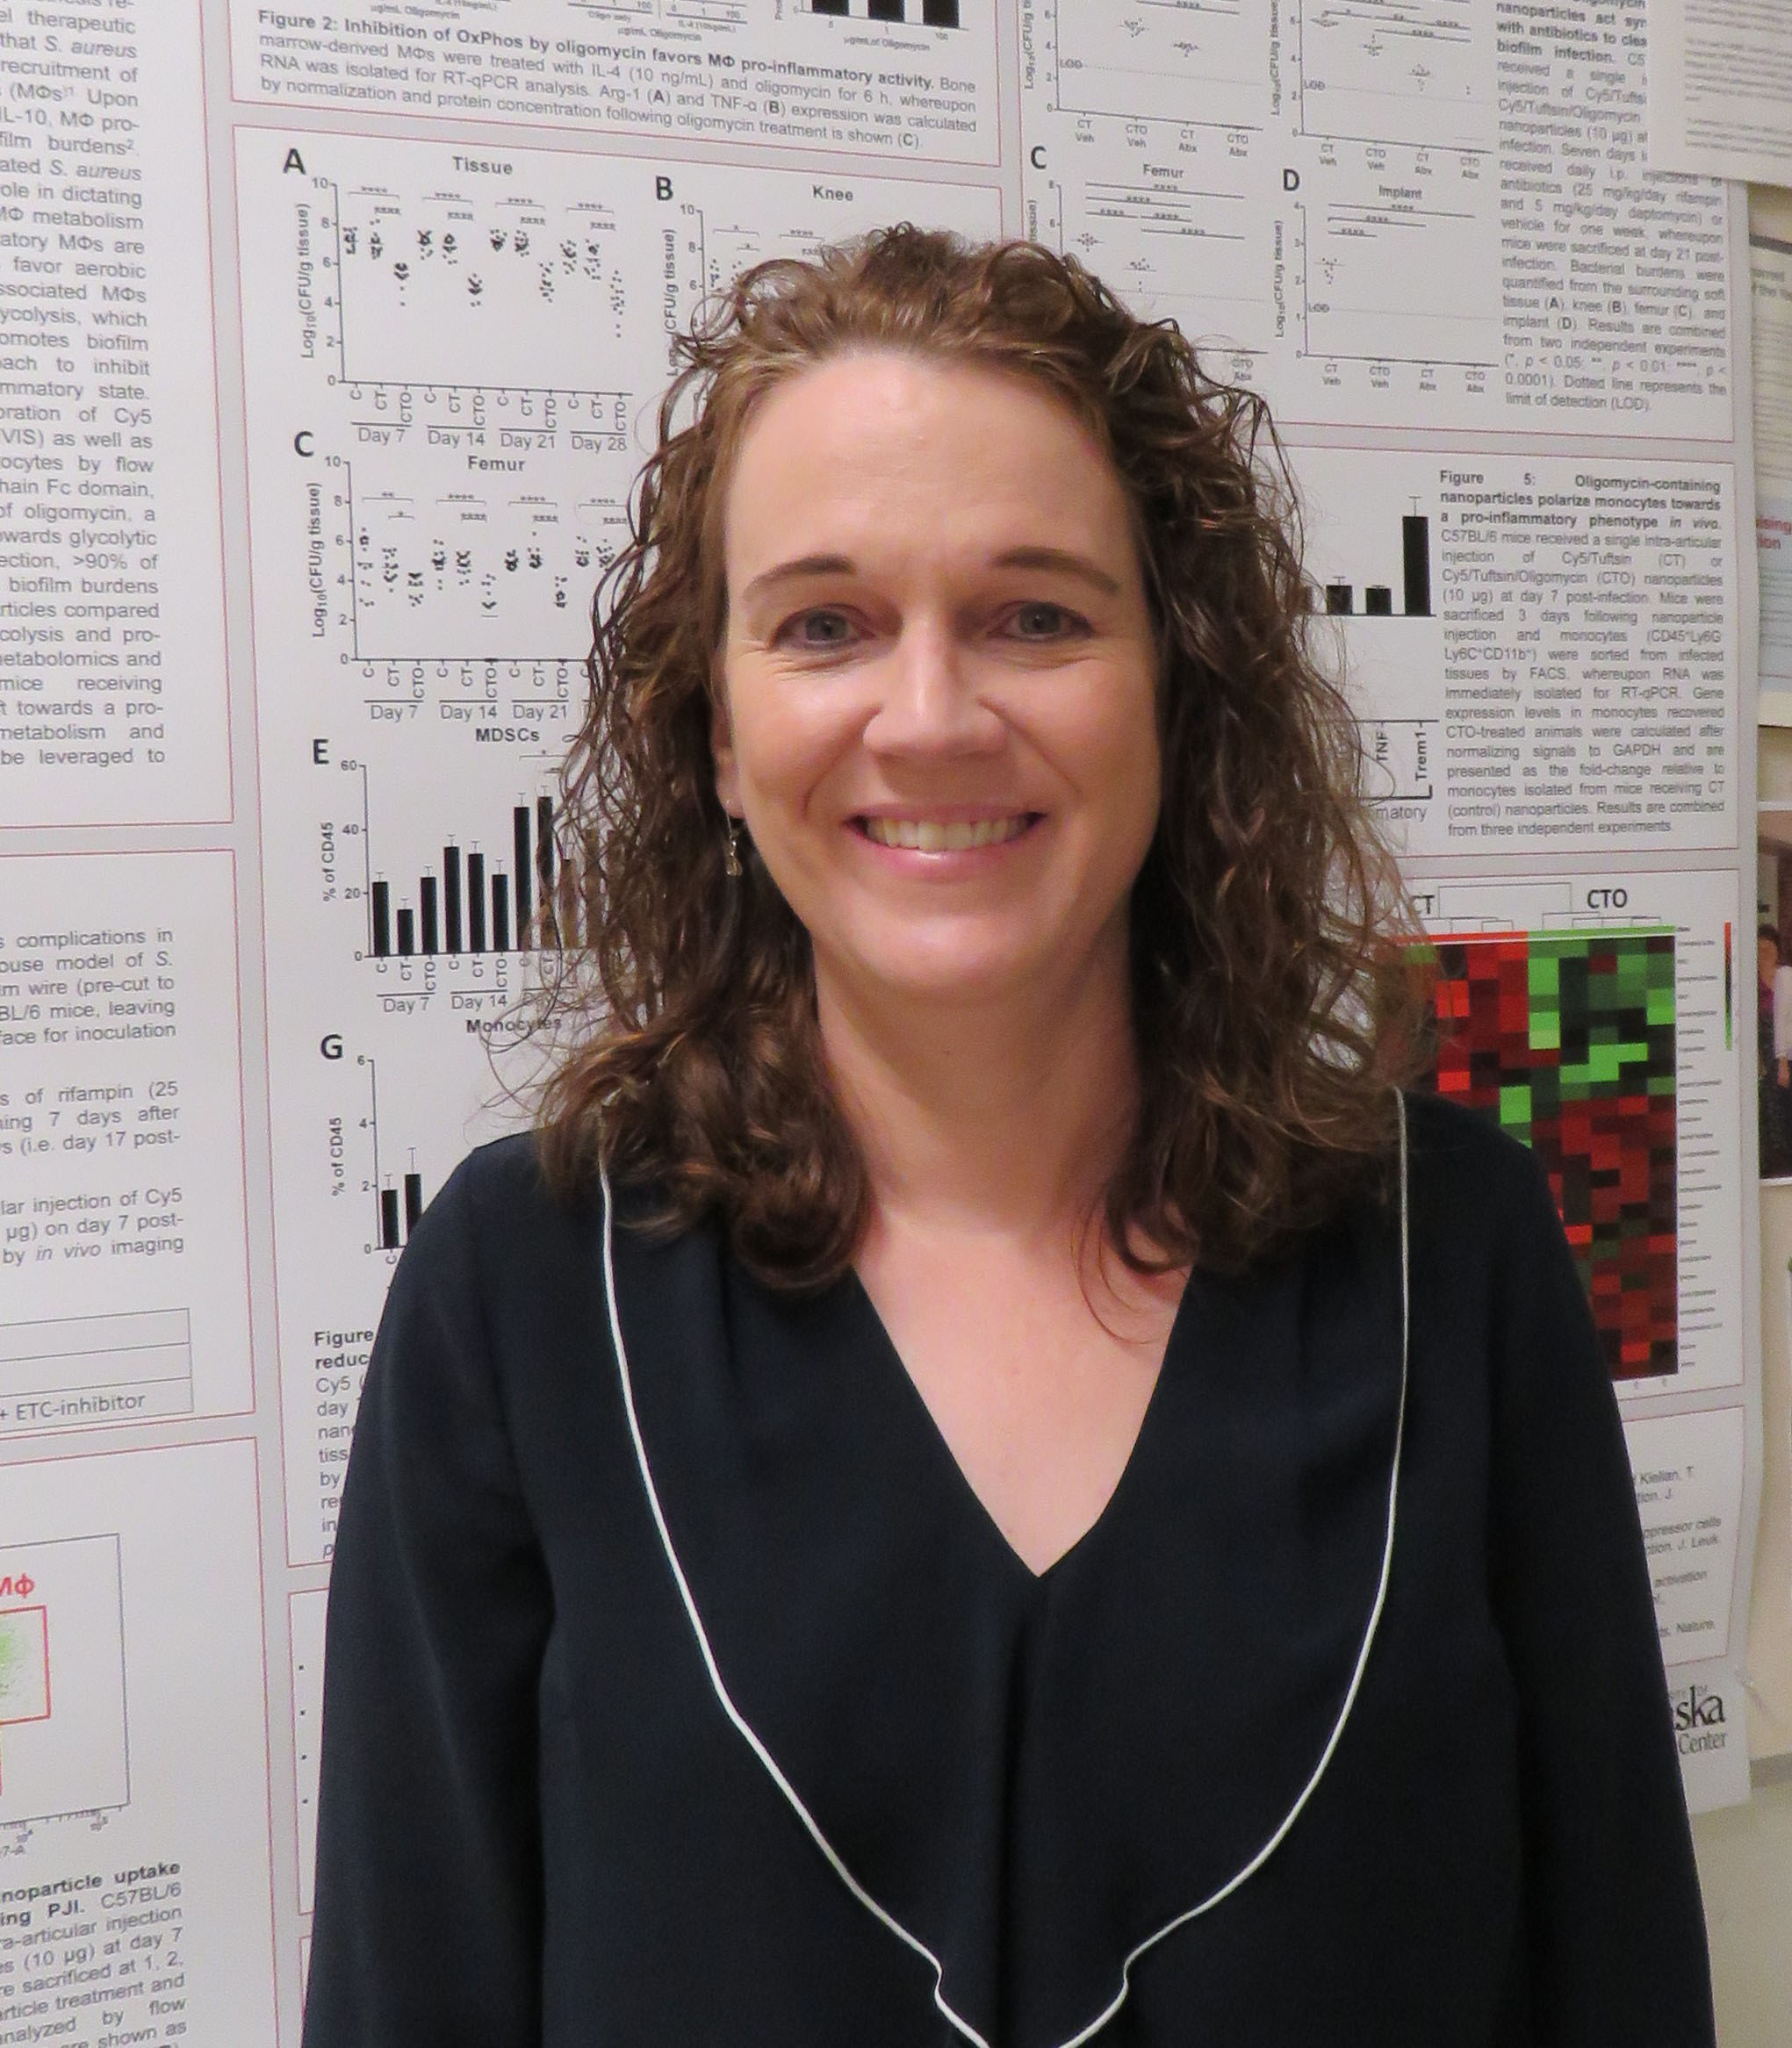 Headshot of Tammy Kielian taken in front of a background of research graphs.